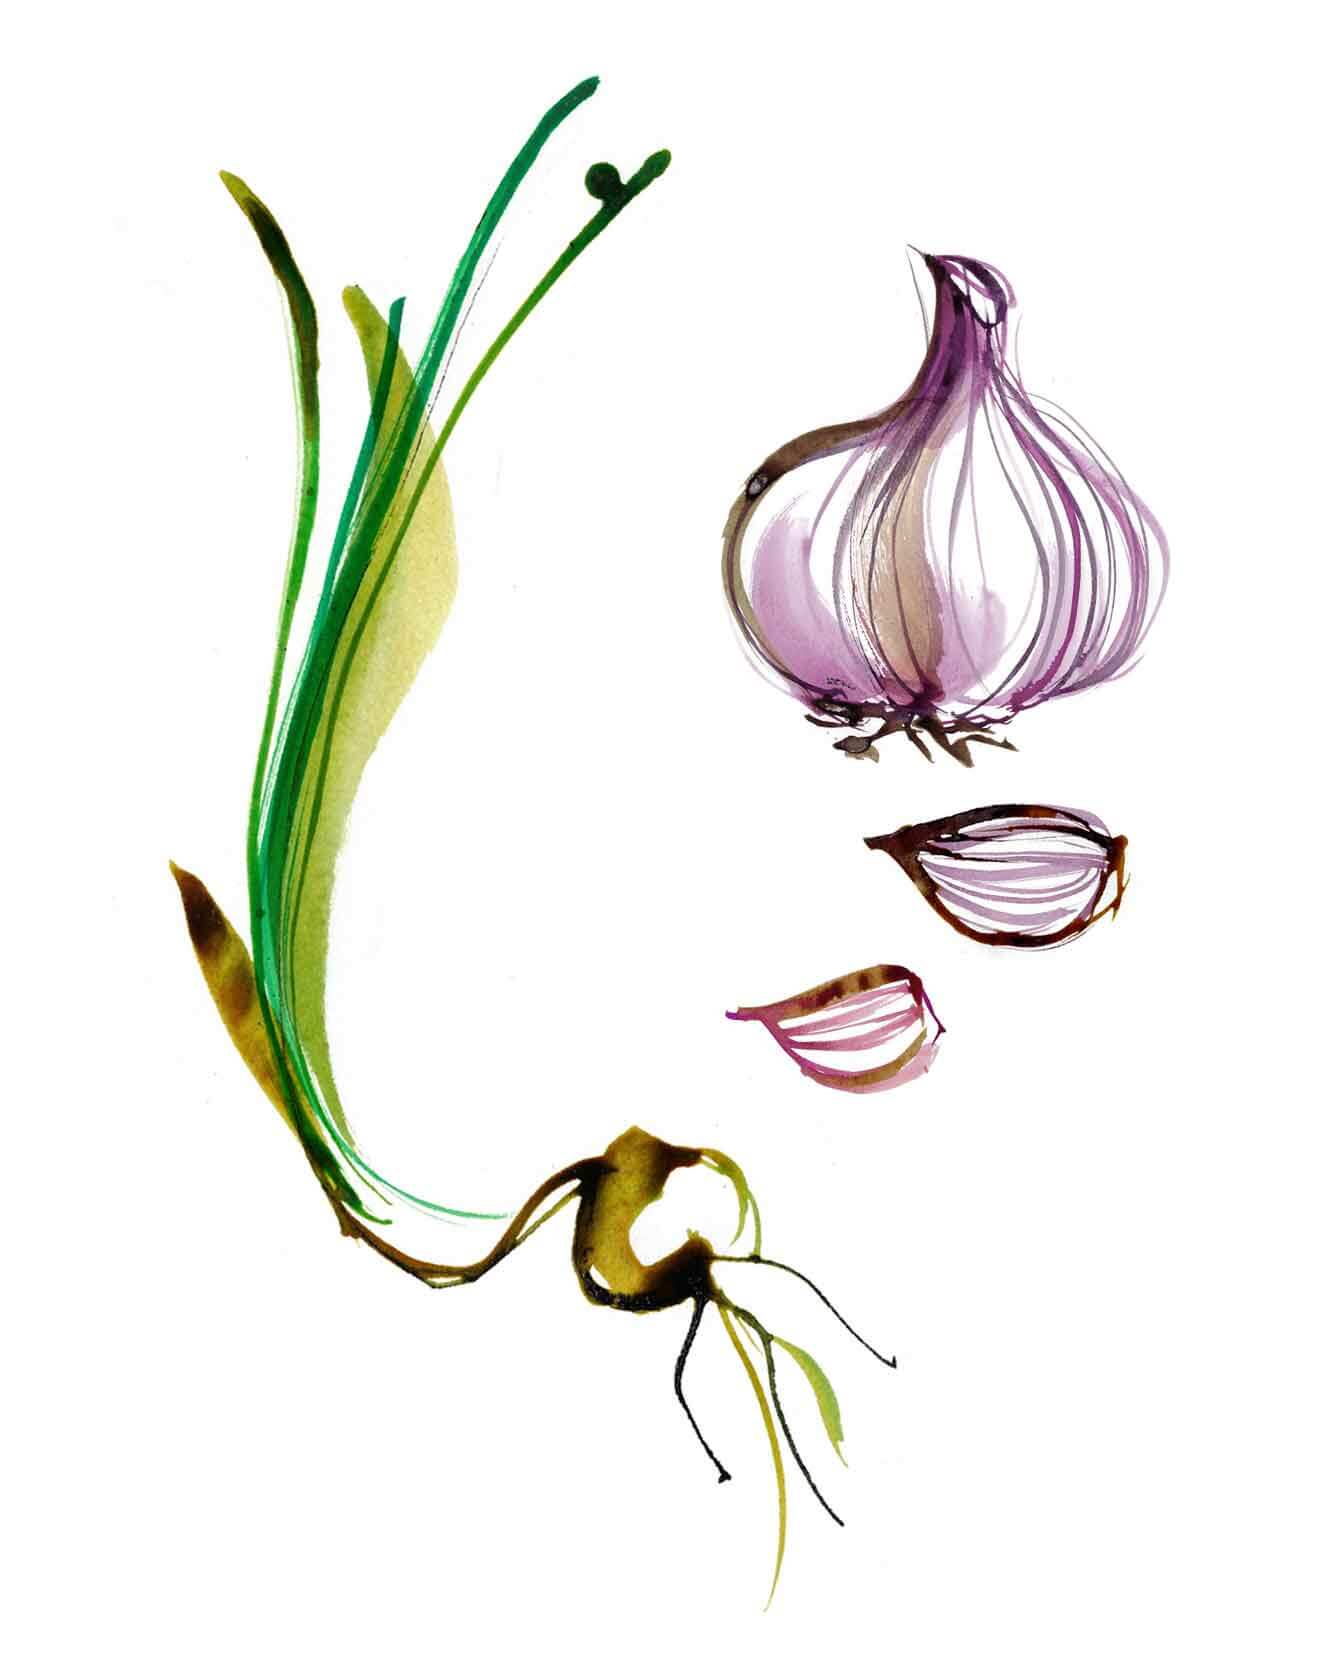 A selection of garlic illustrated from the UK. Seasonal Spring vegetables illustrated created with watercolour and ink drawing. Full colour Illustrations for the best produce in UK as an illustrated Food Map